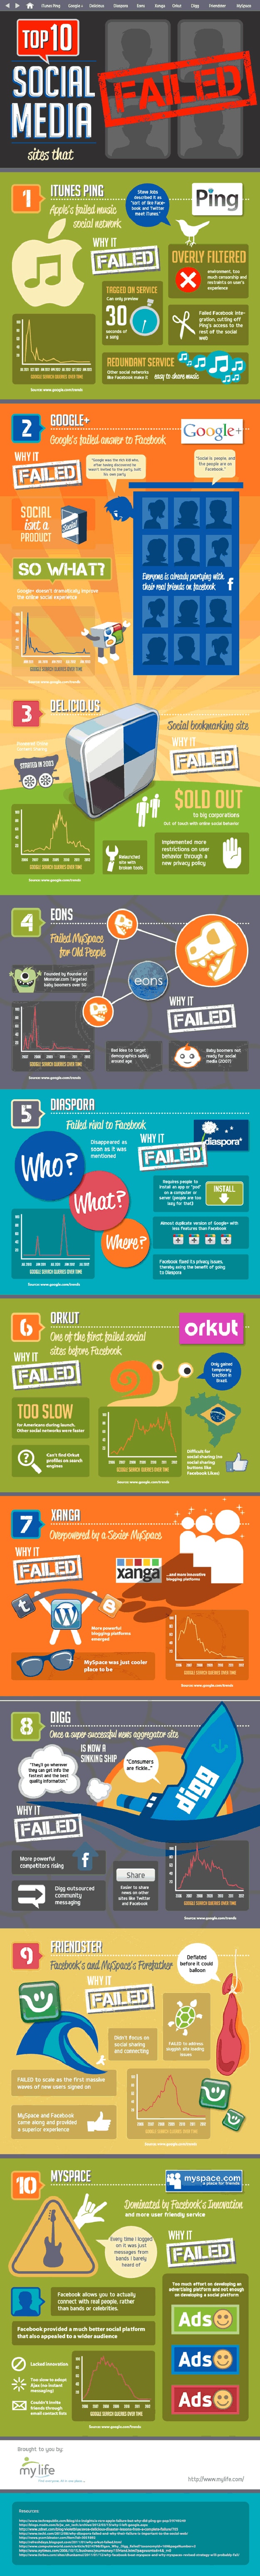 Top 10 Failed Social Media Sites & What We Can Learn [Infographic]